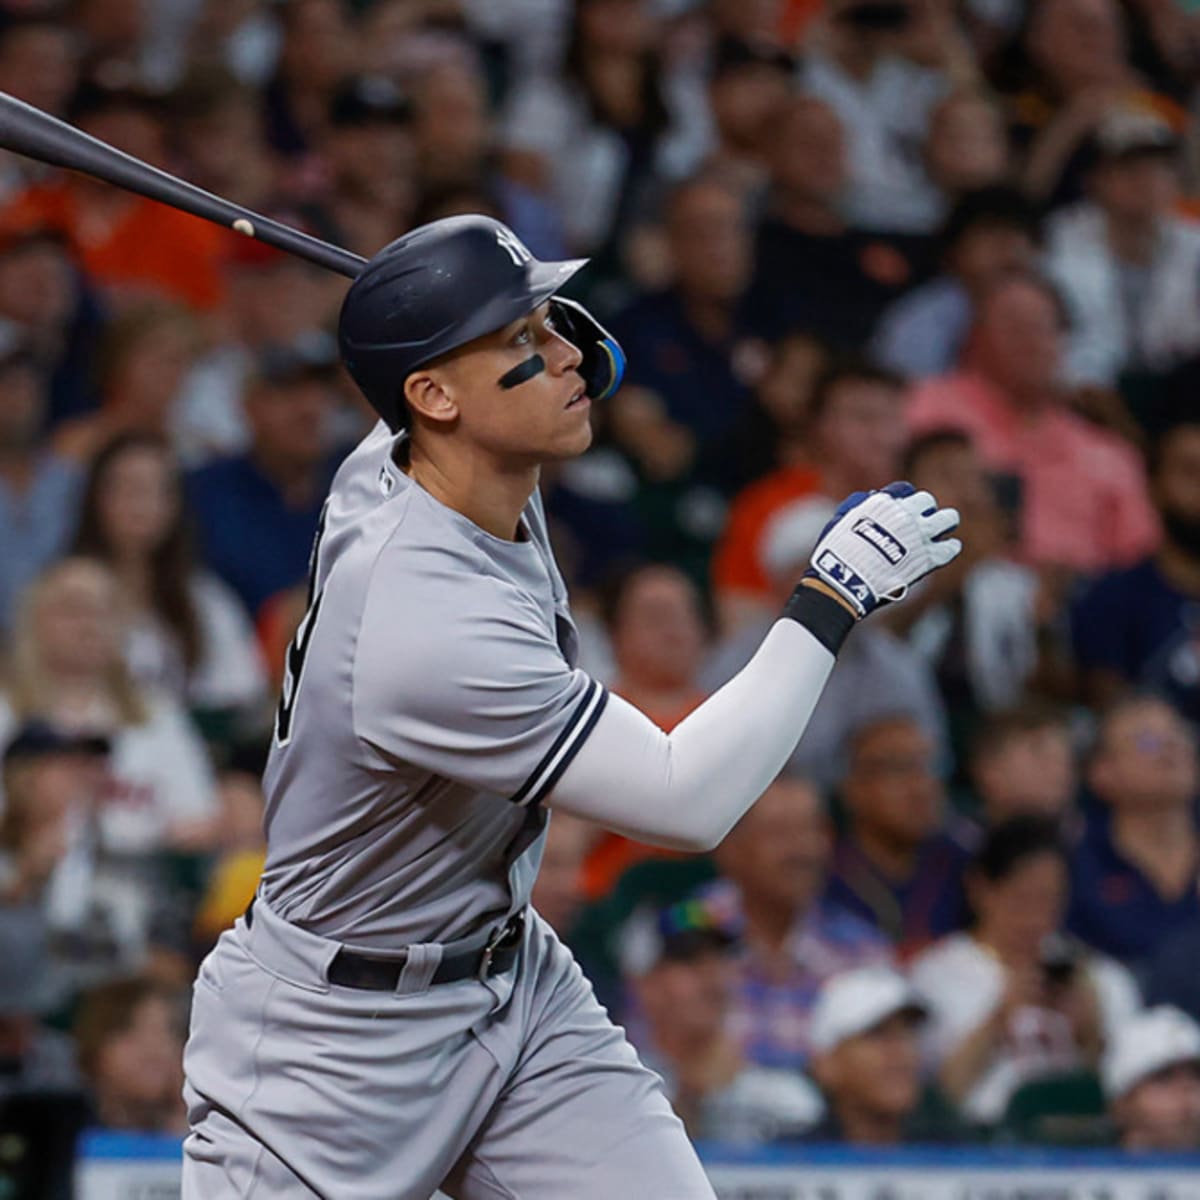 Aaron Judge vs Shohei Ohtani in 2022, do you agree with Judge